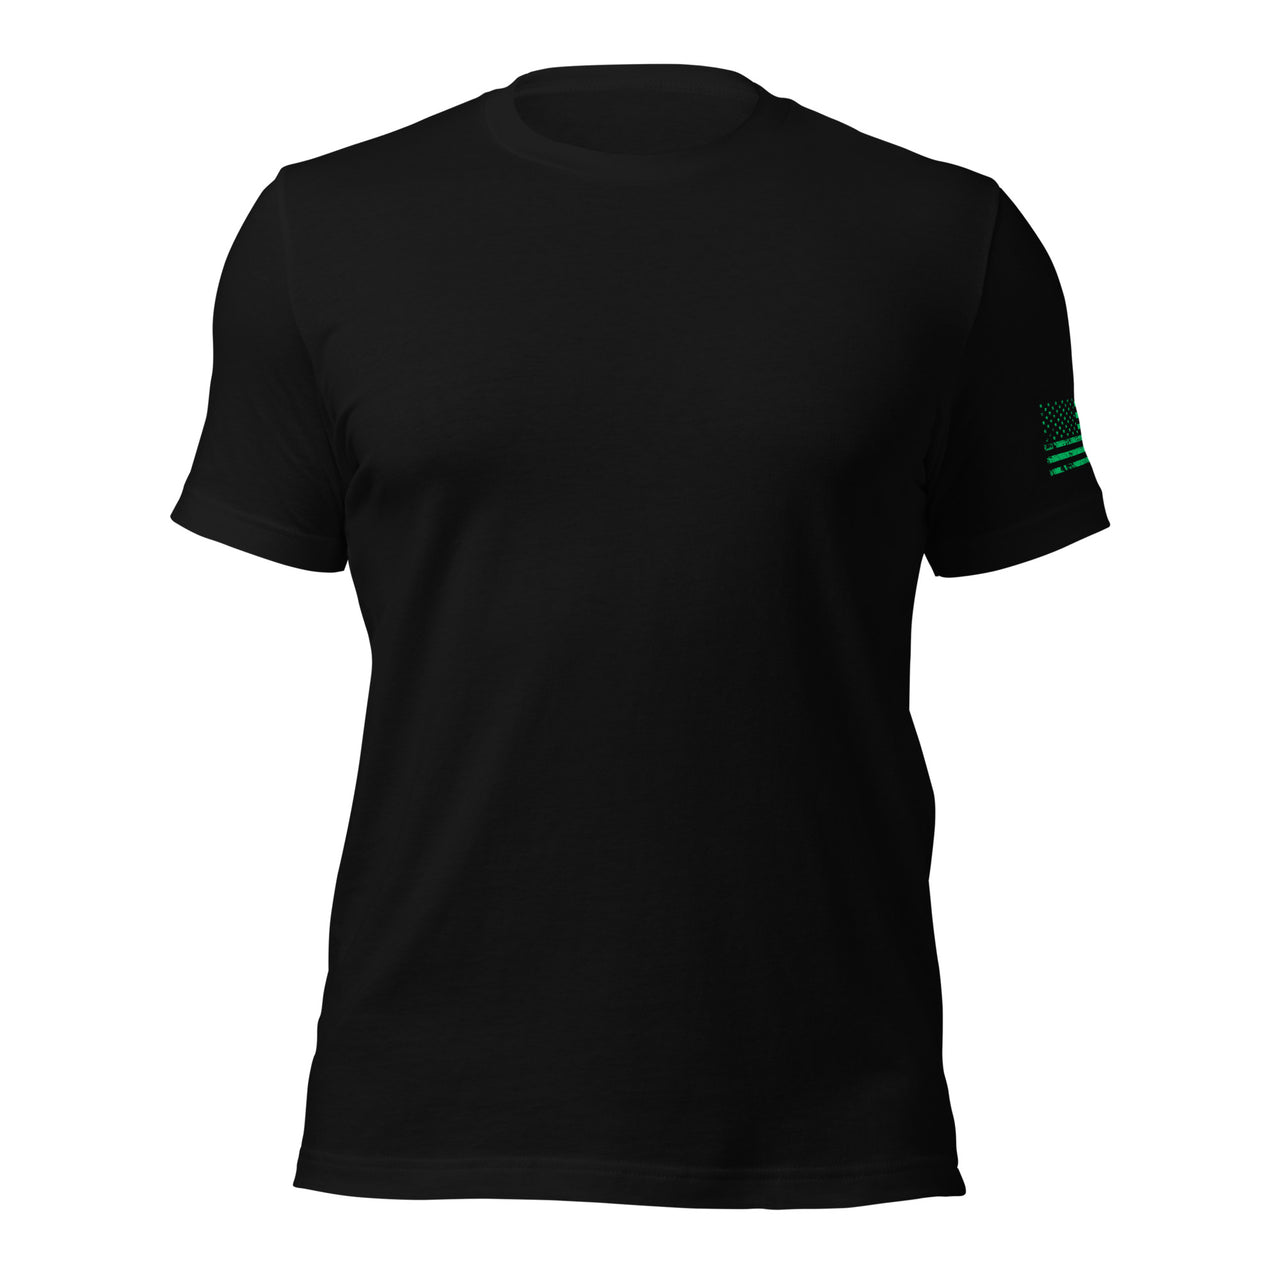 Celtic Cross T-Shirt With 4 Leaf Clover And American Flag in black front view